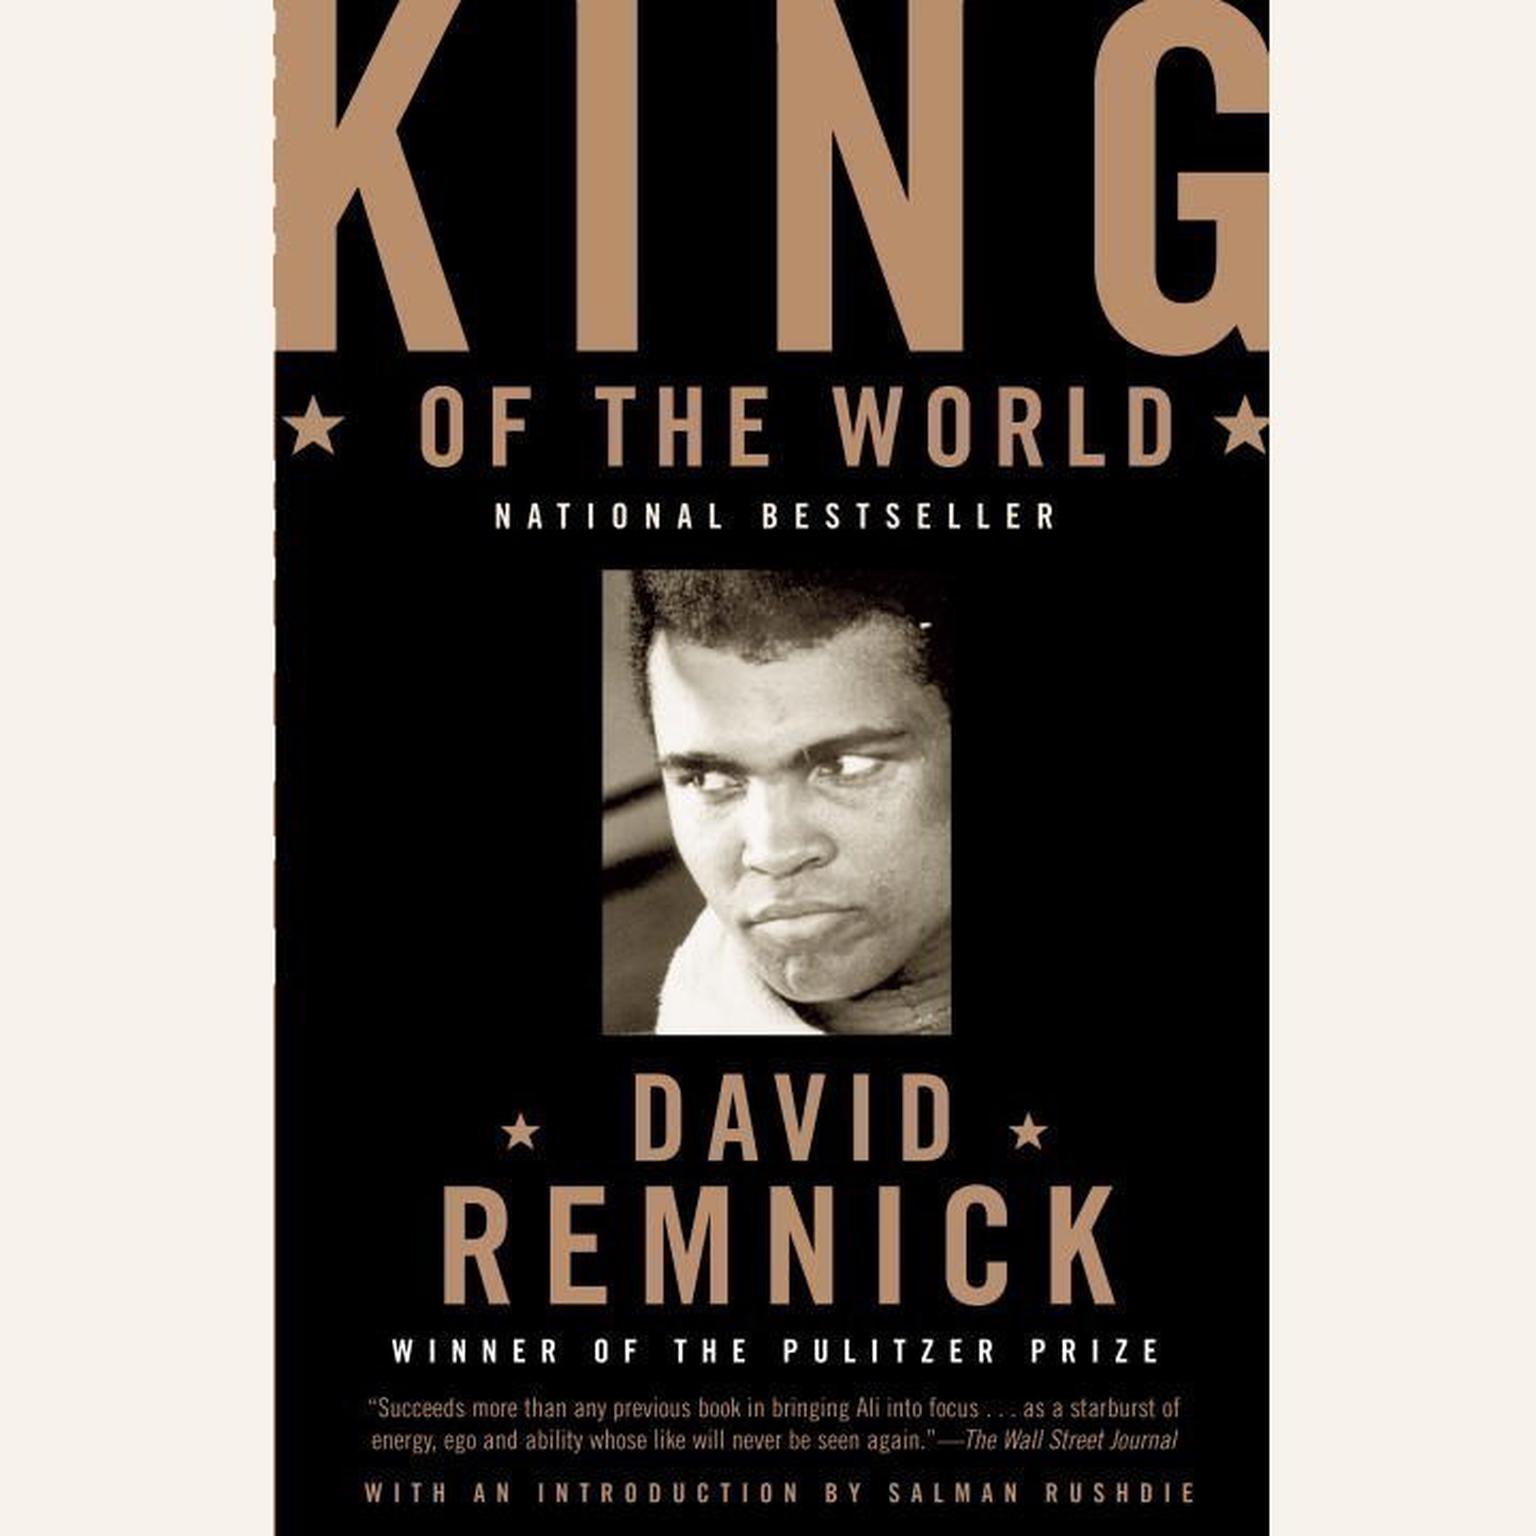 King of the World (Abridged) Audiobook, by David Remnick